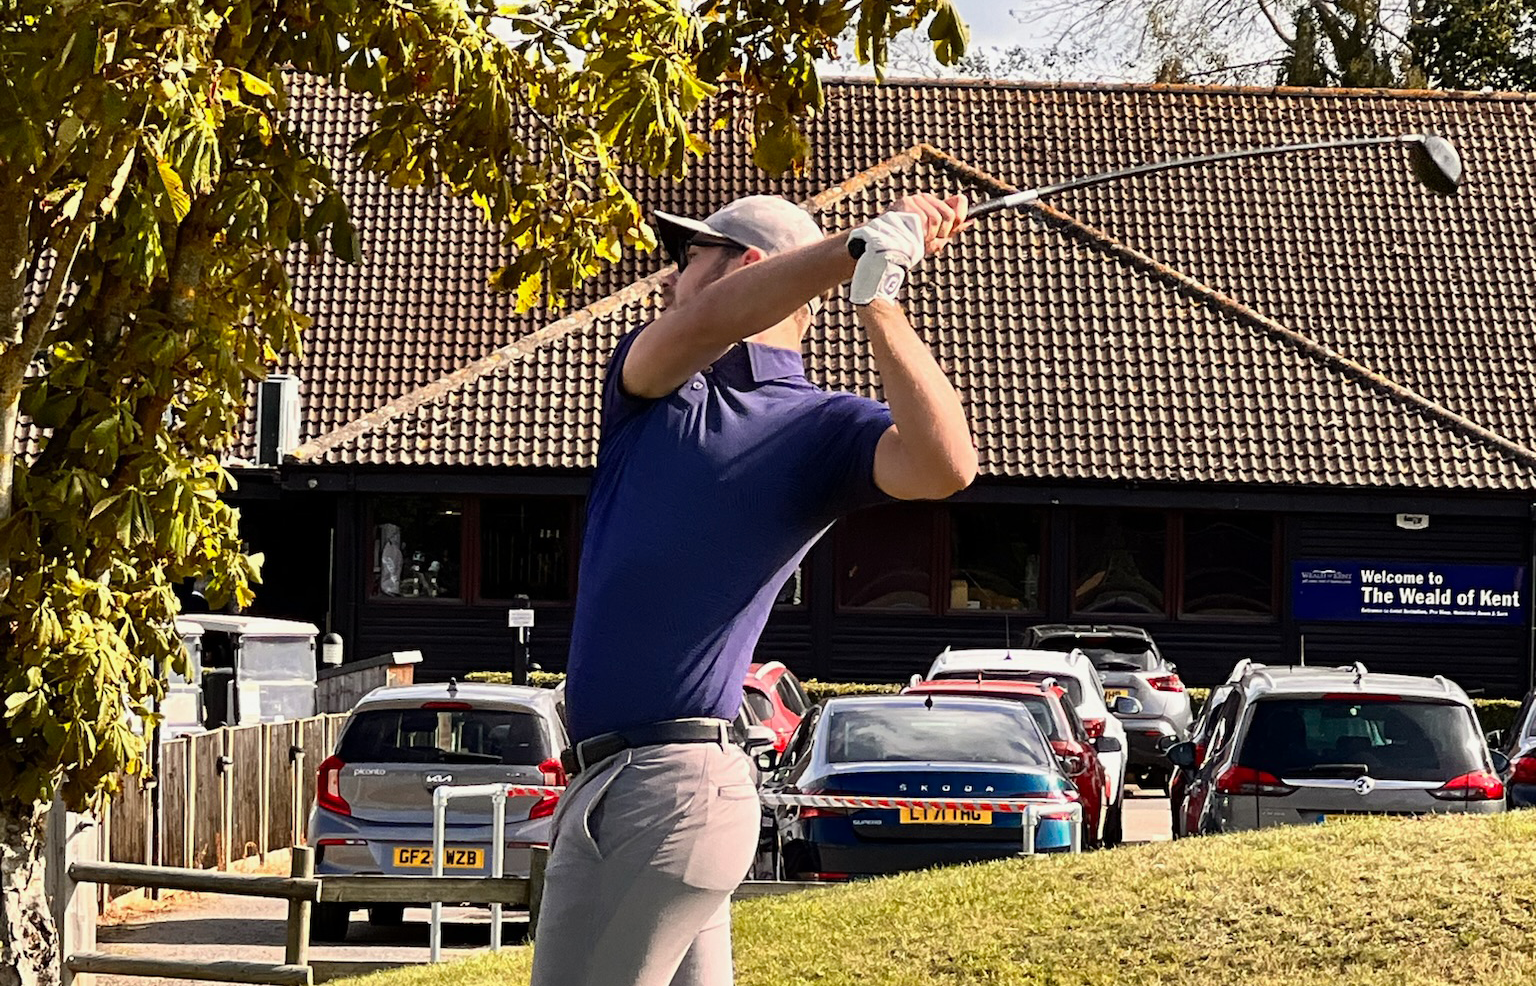 Photograph of a person playing golf at a charity golf event